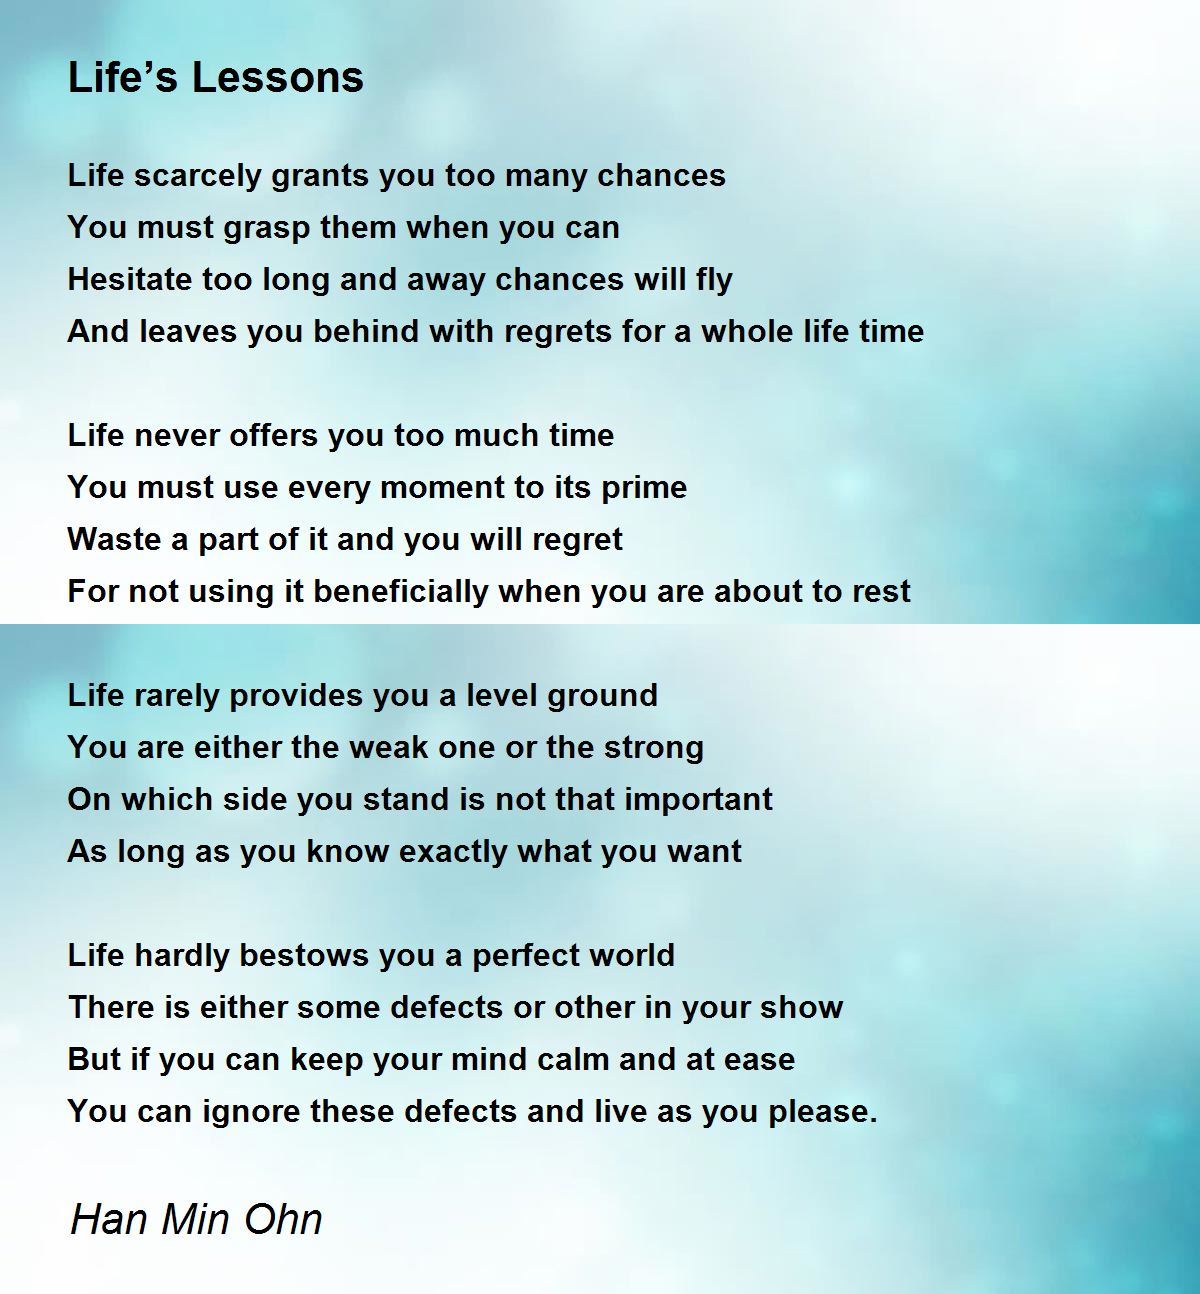 75 Life Lesson Poems - Poems about Learning Lessons from Life